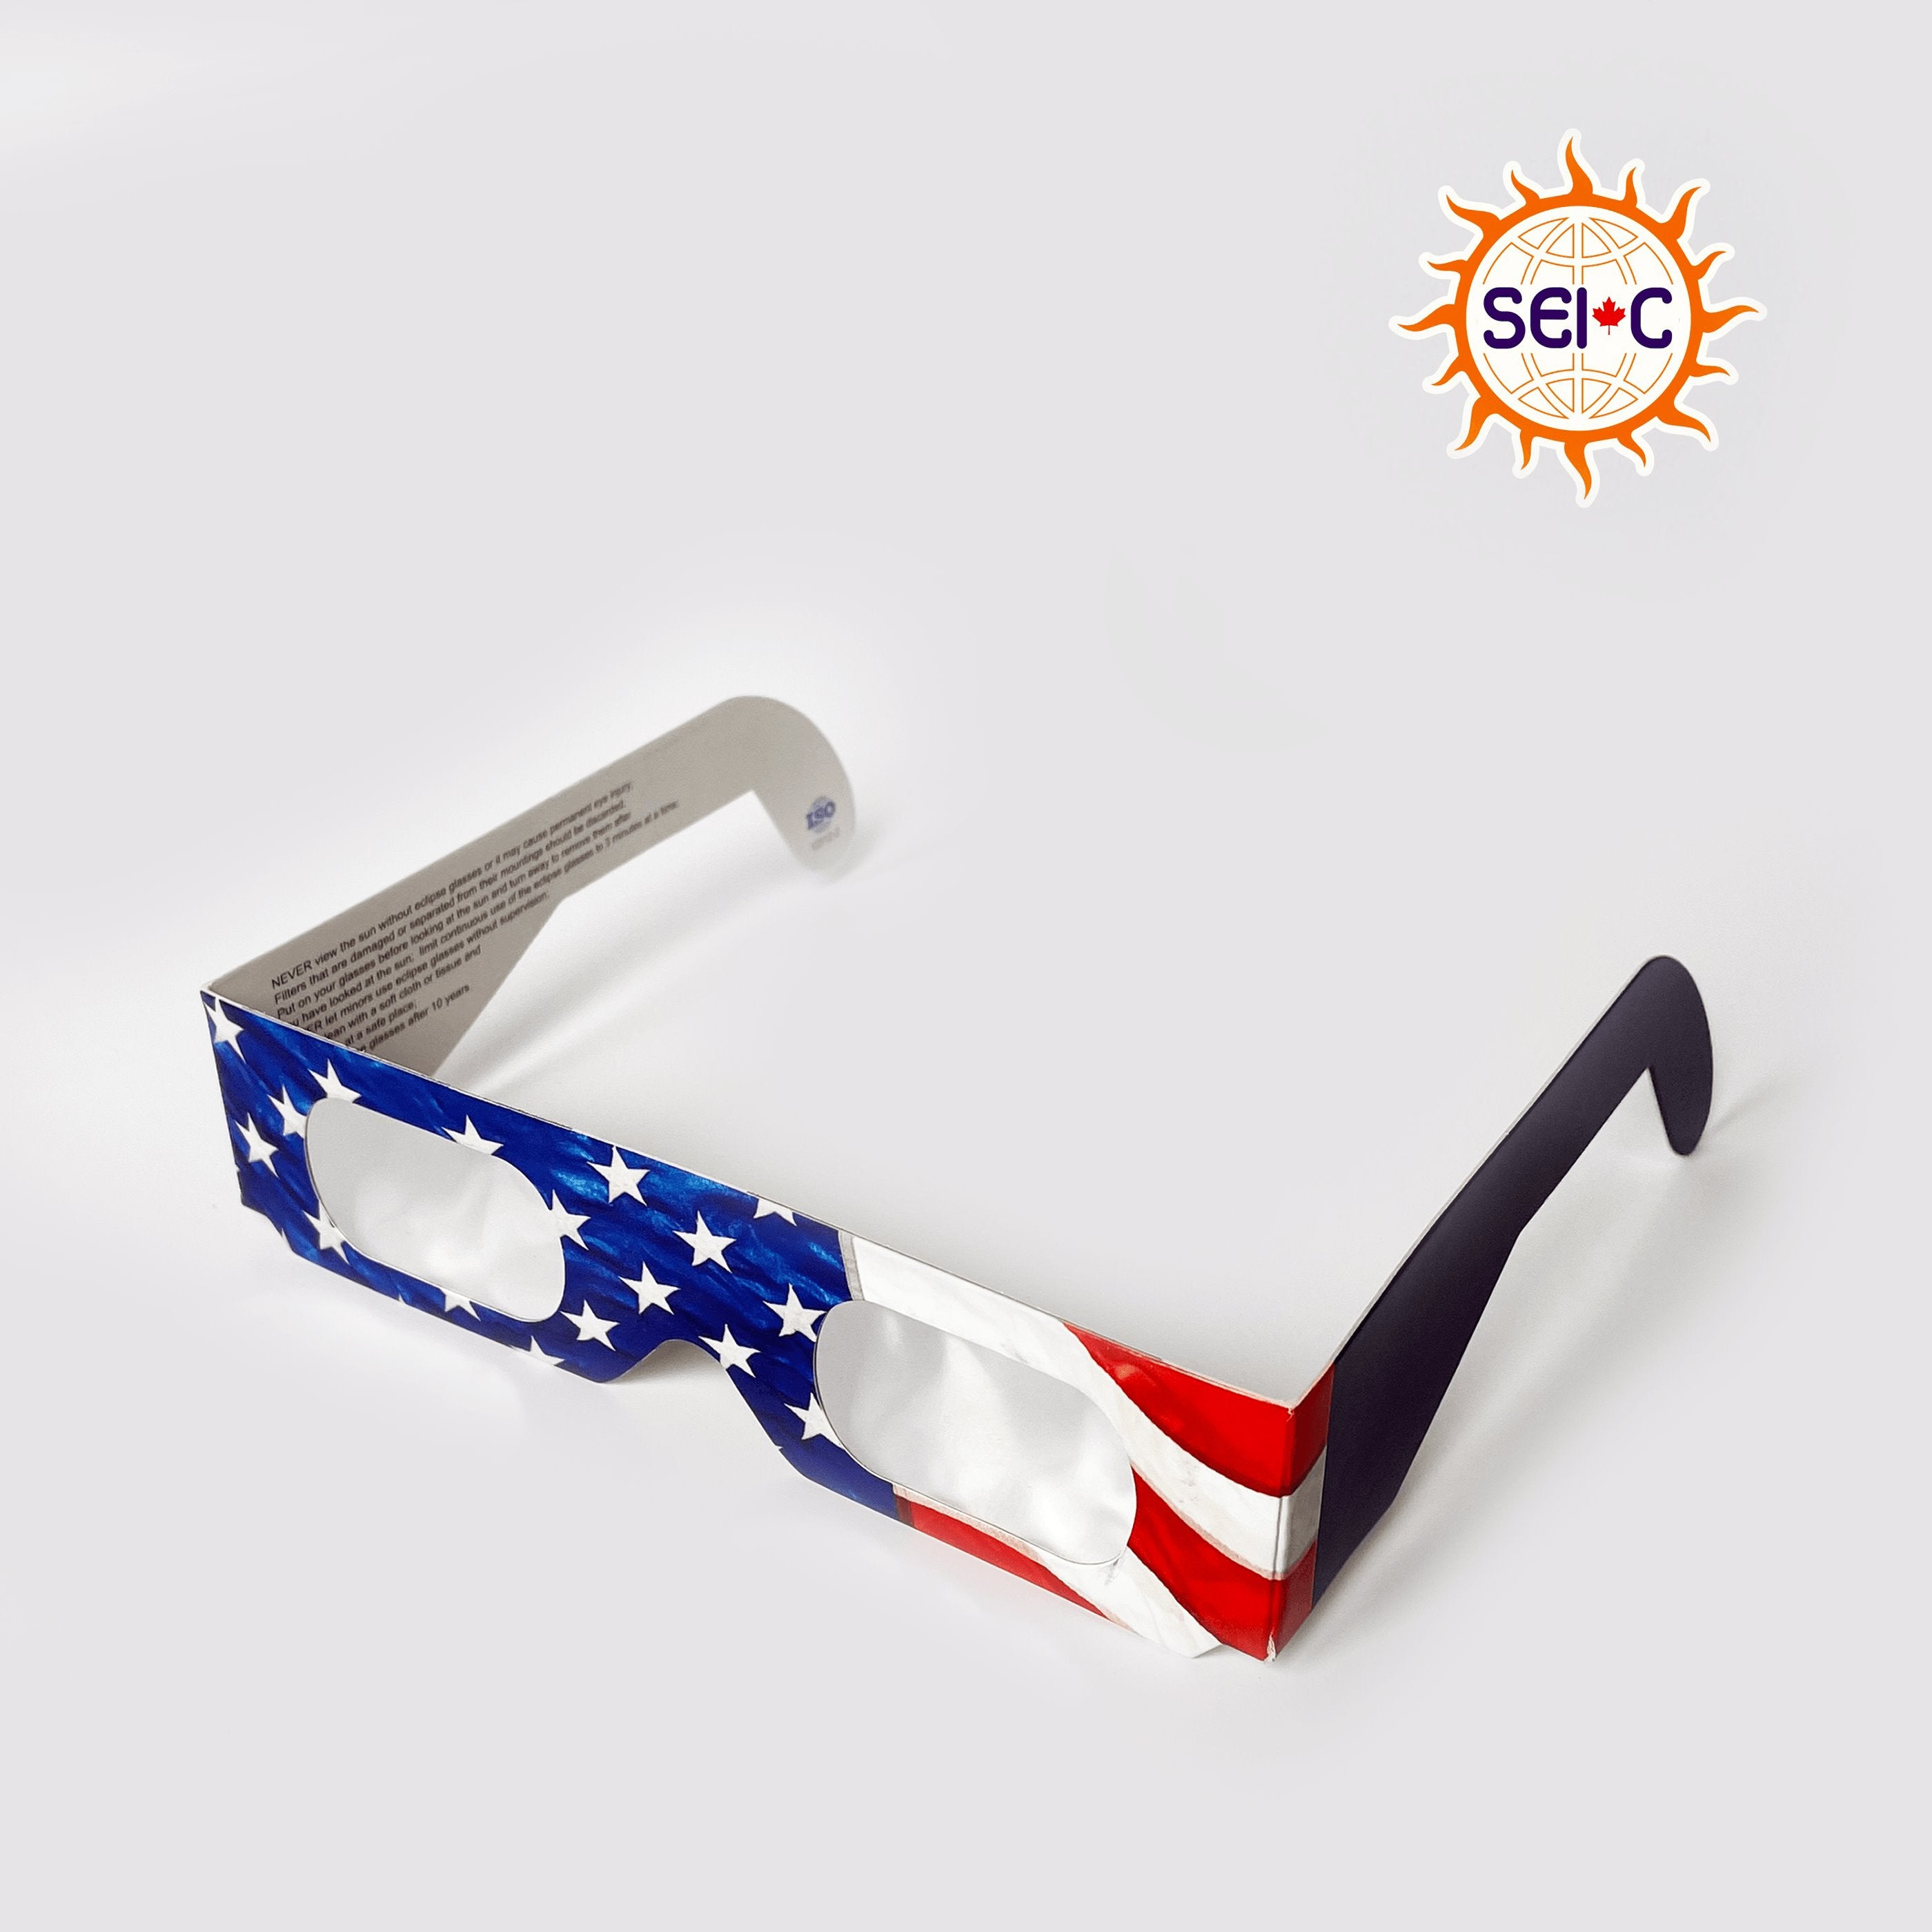 http://solareclipseinternational.com/cdn/shop/files/seic-paper-solar-eclipse-glasses-ce-and-iso-certified-eclipse-shade-for-direct-sun-viewing-pack-of-50-solar-eclipse-glasses-solar-eclipse-international-american-flag-483828.jpg?v=1698693070